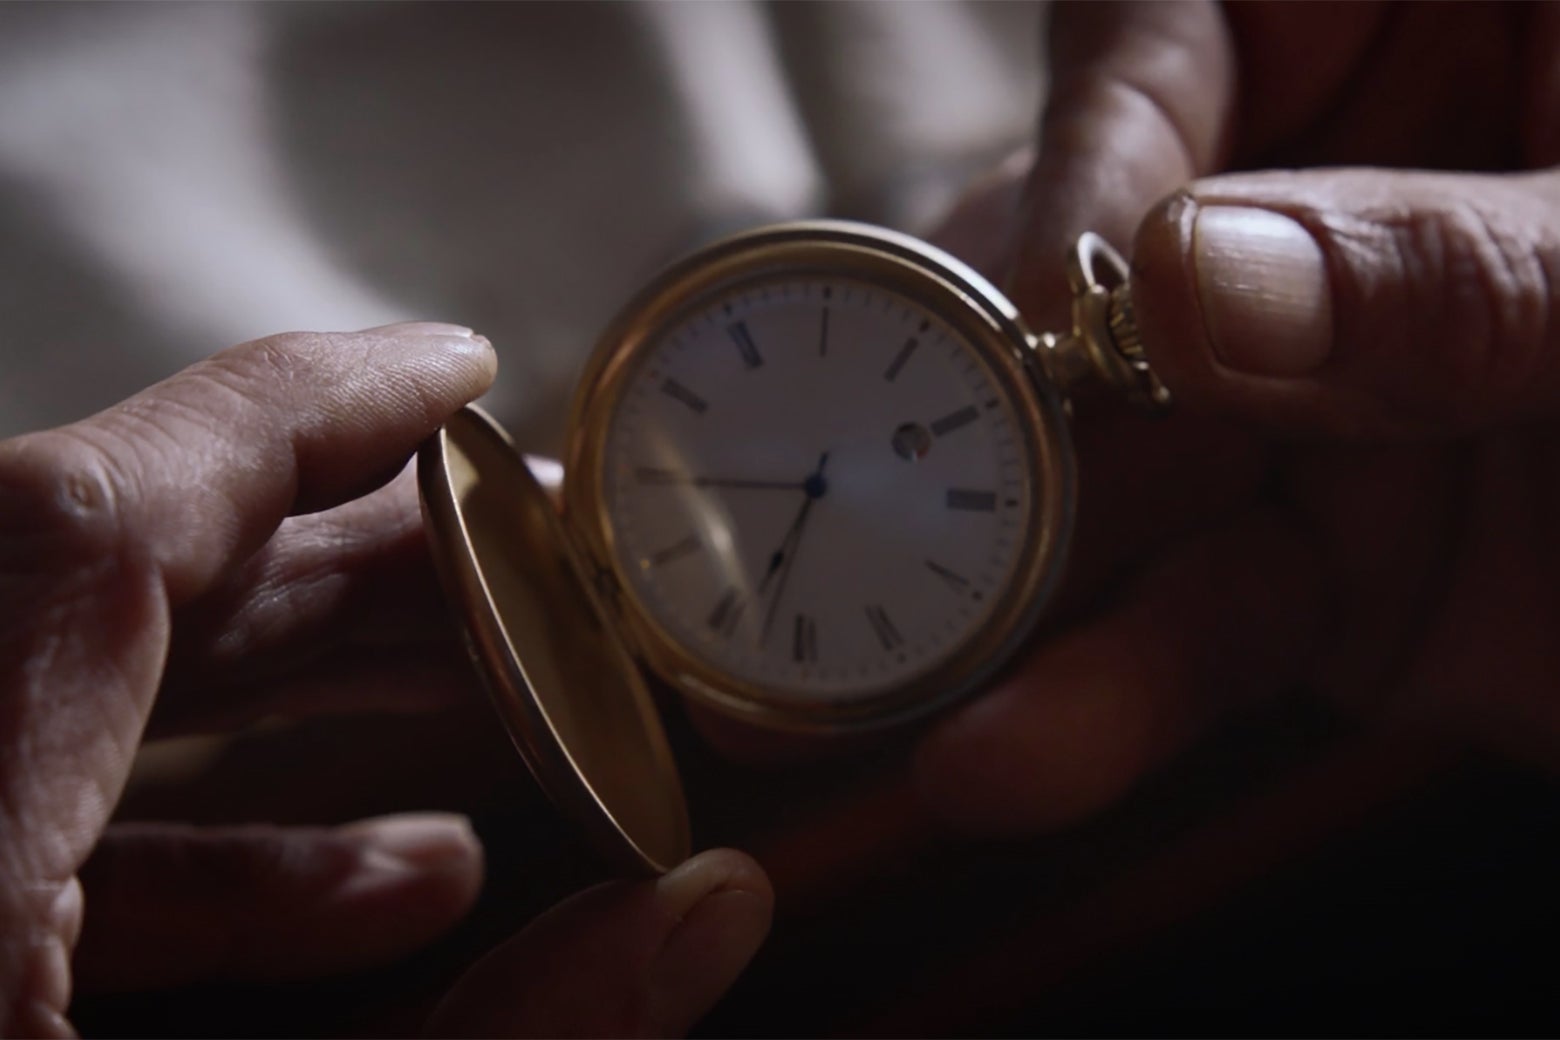 A man's hands hold a pocket watch in a still from Watchmen.